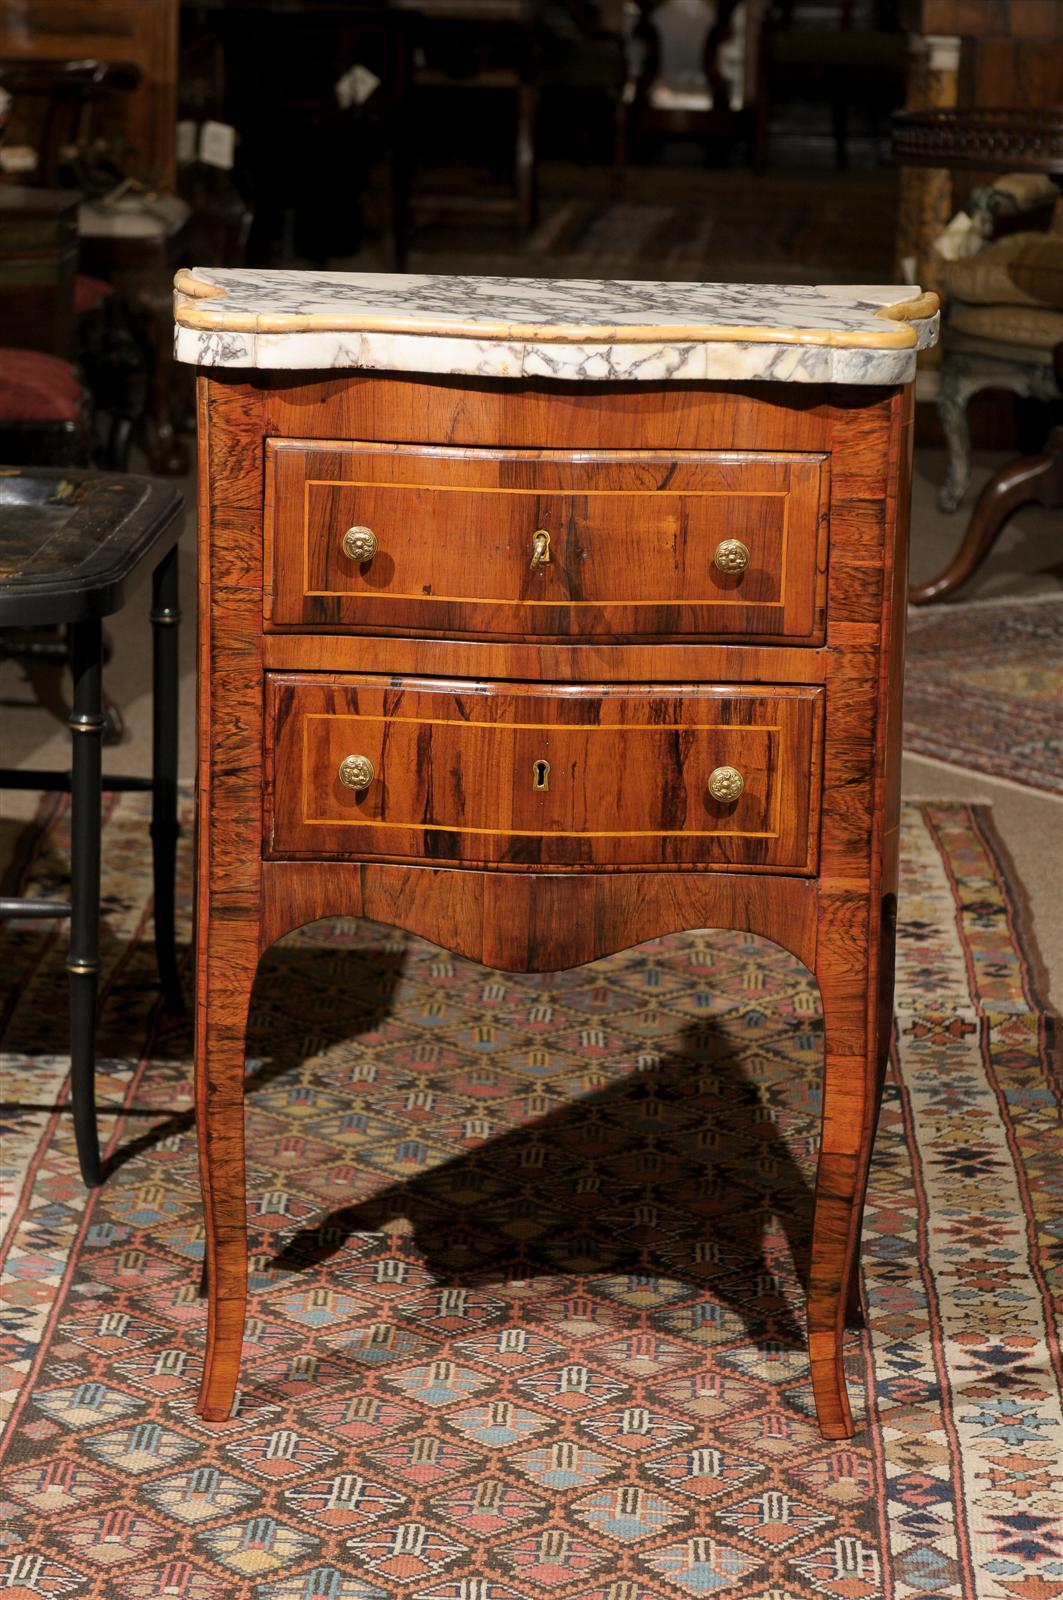 Petite Italian serpentine commode in rosewood veneer with string boxwood inlay , inlaid marble top, 2 drawers. shaped apron and splayed feet. 

William Word Fine Antiques: Atlanta's source for antique interiors since 1956.